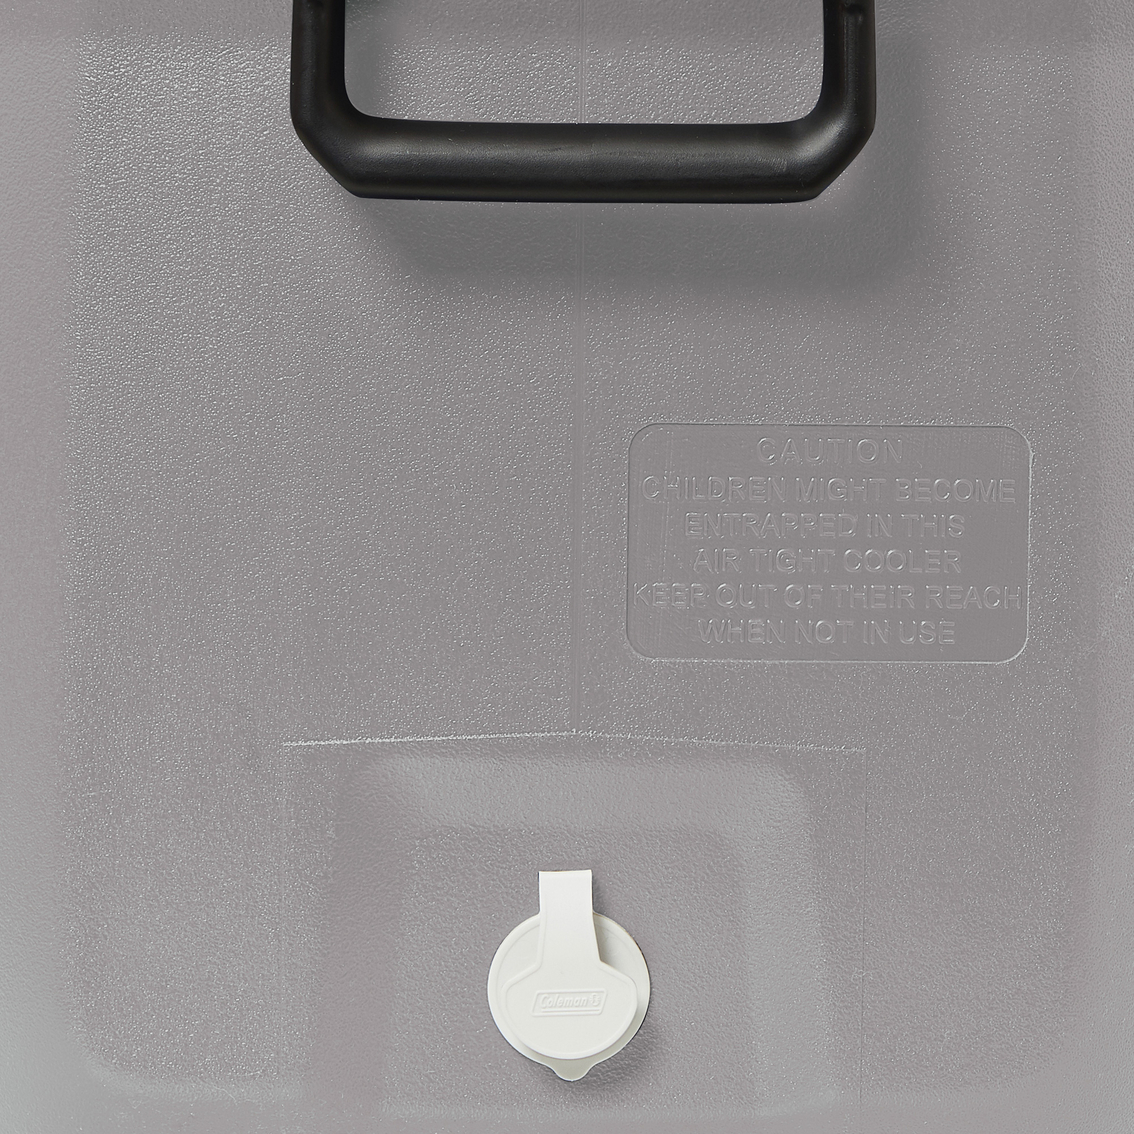 Coleman® 52 qt. Hard Ice Chest Cooler - Image 8 of 8